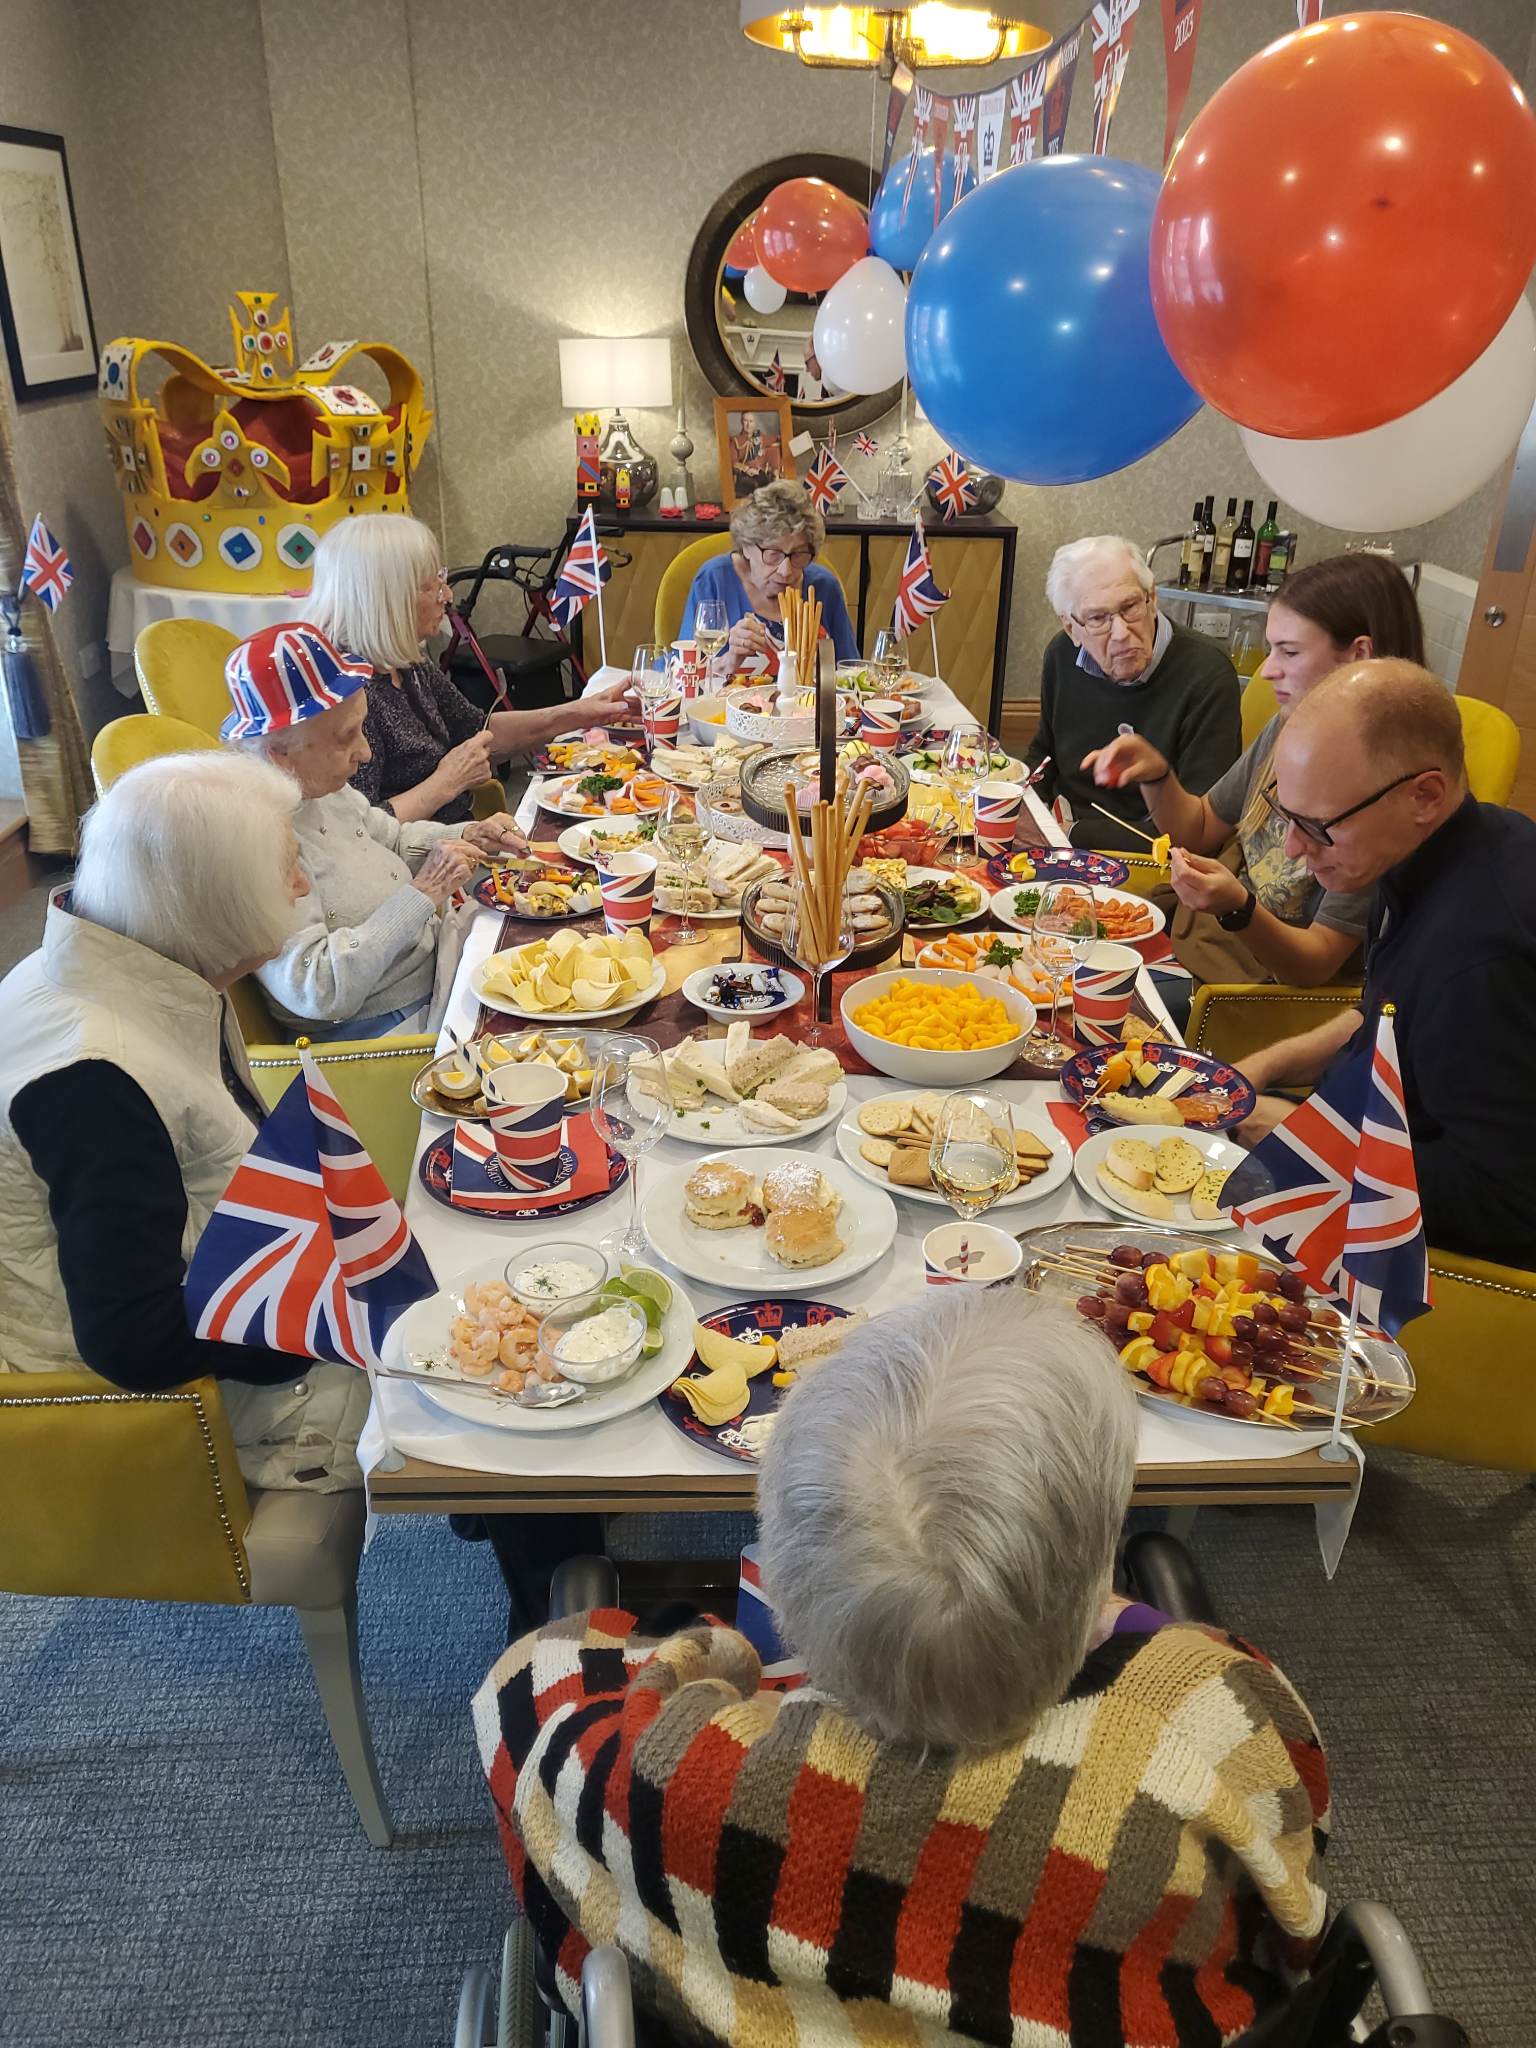 A group of residents and loved ones around a table eating a selection of food. Balloons and Union Jack flags.